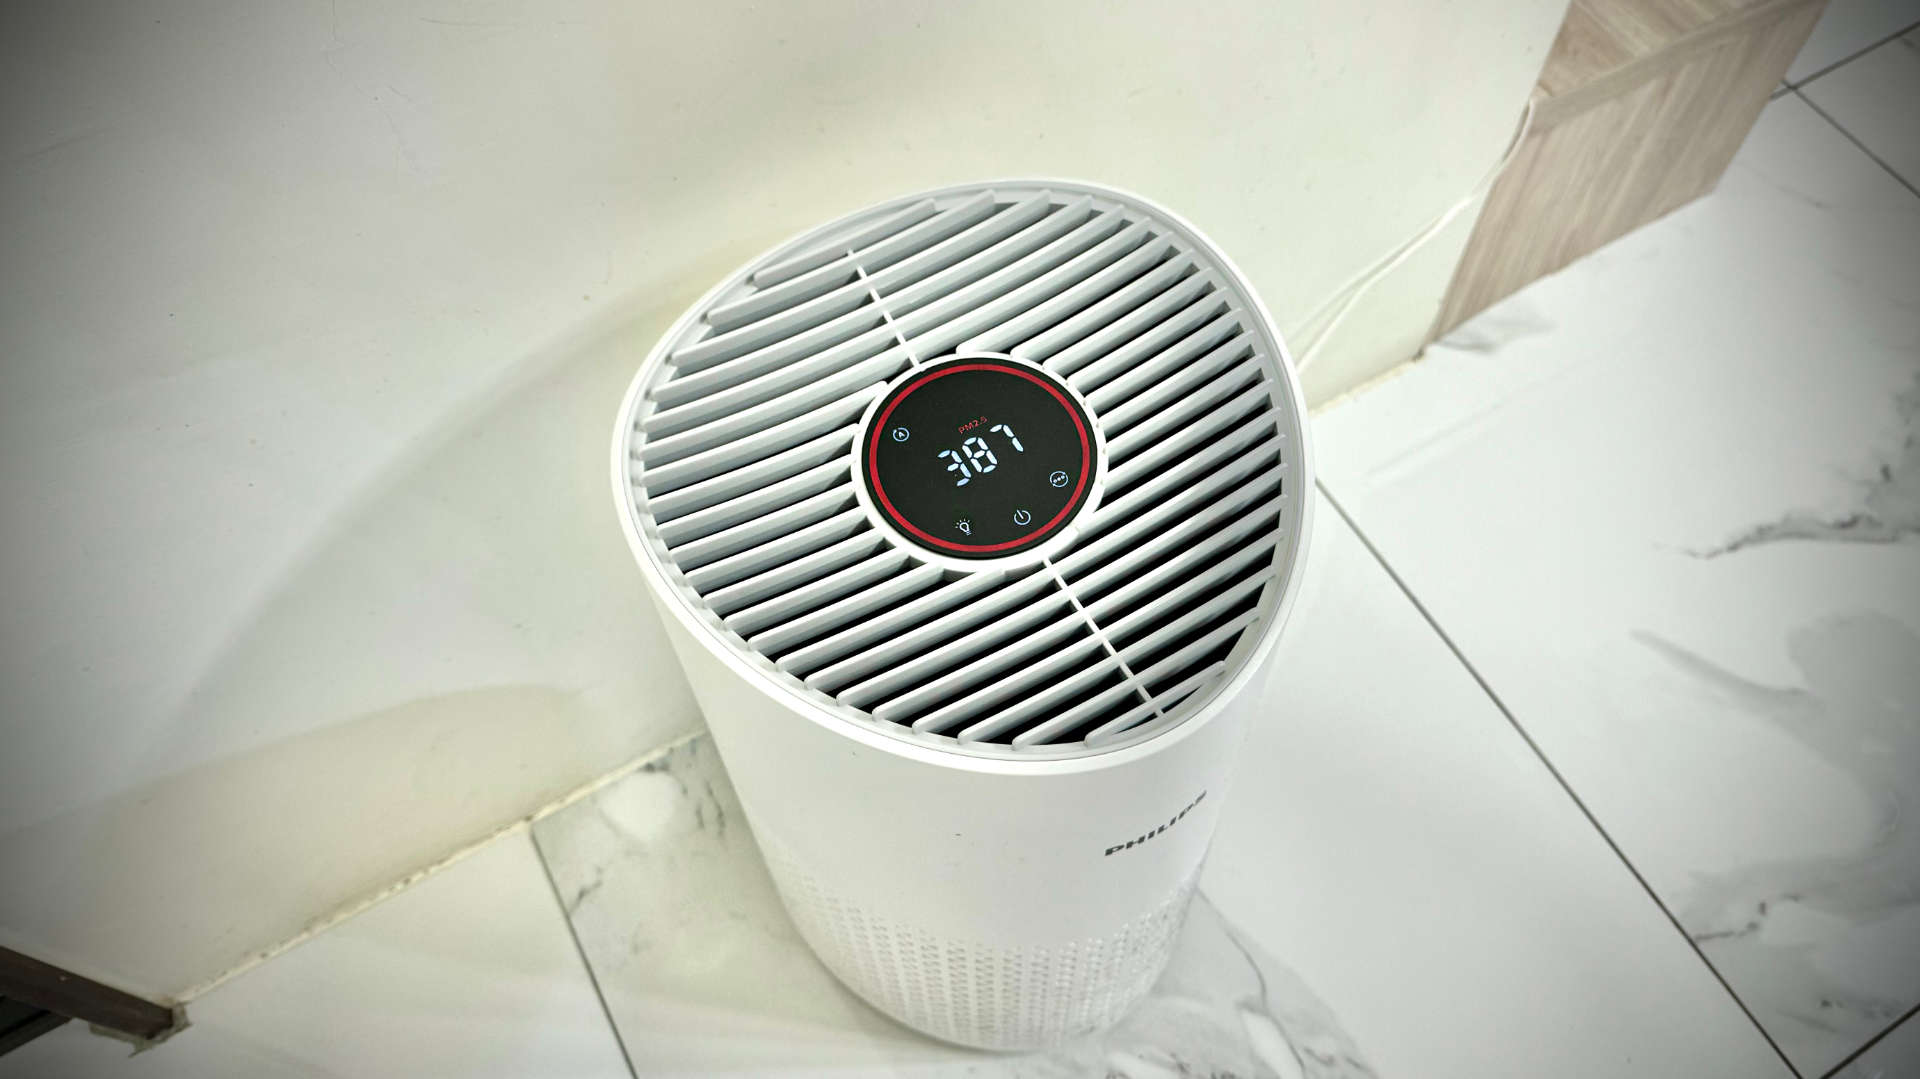 An air purifier. The screen on the purifier shows 387 PM2.5, with a red color indicating hazardous concentrations of particulate matter.